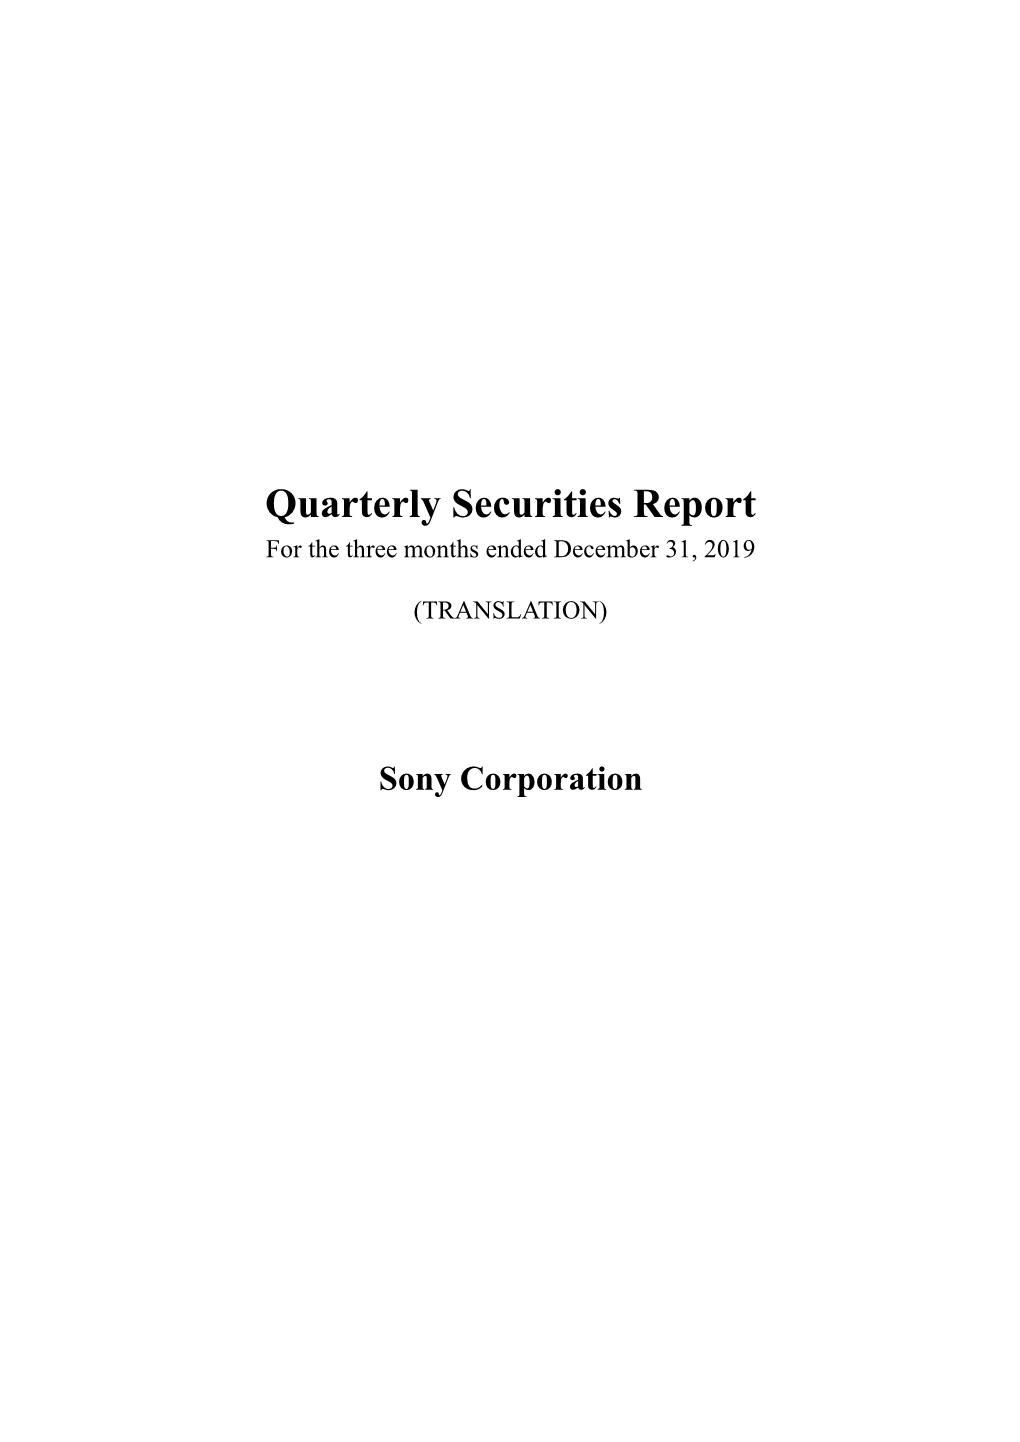 Quarterly Securities Report for the Three Months Ended December 31, 2019